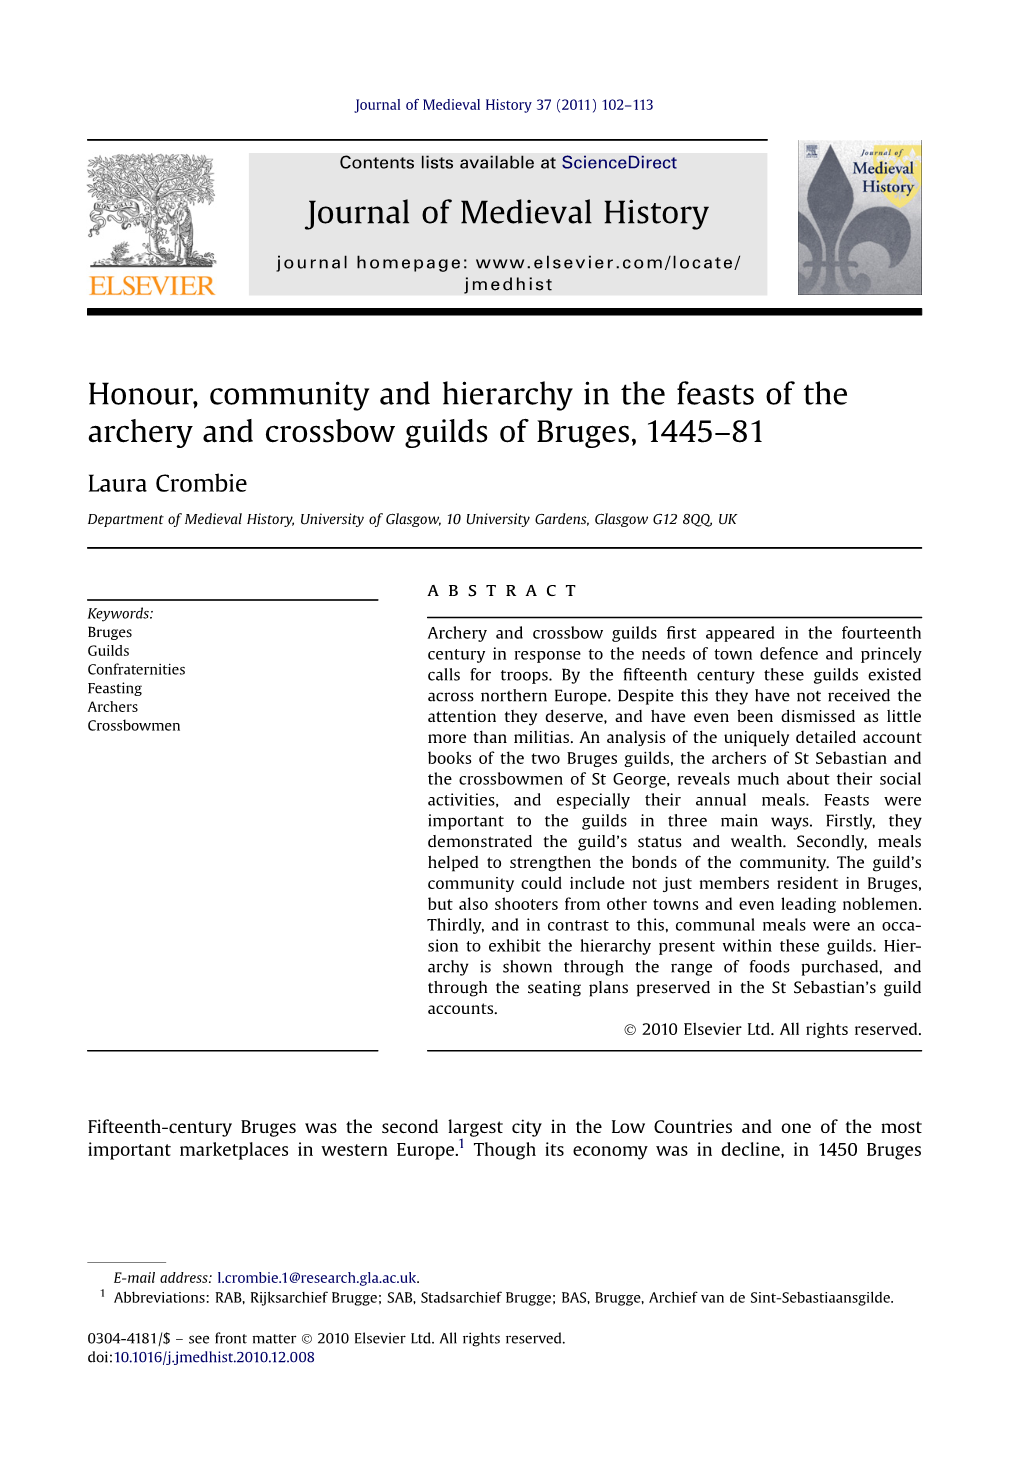 Honour, Community and Hierarchy in the Feasts of the Archery and Crossbow Guilds of Bruges, 1445–81